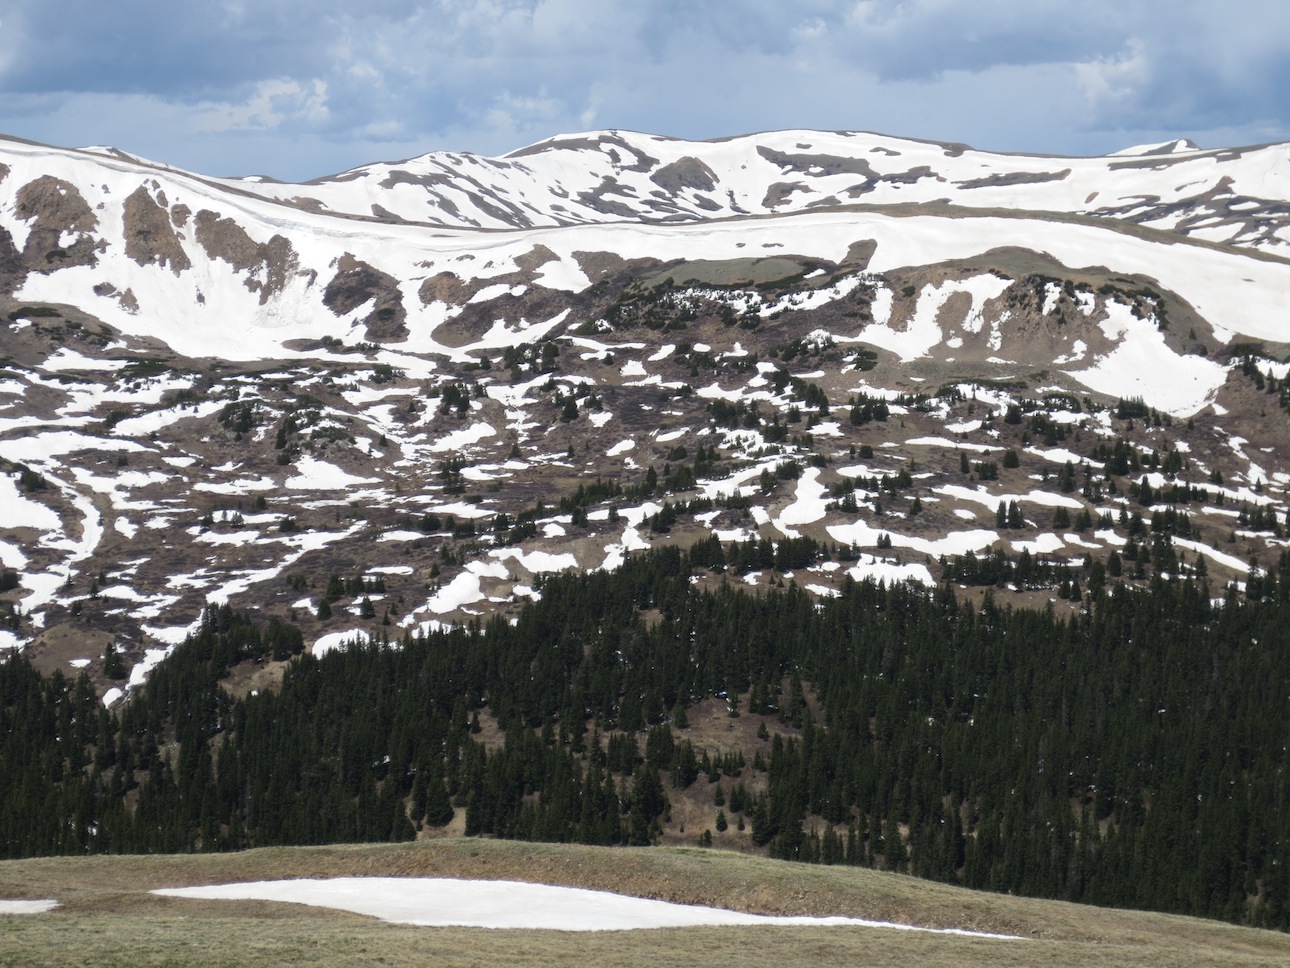 Snow capped mountains of Loveland Pass.